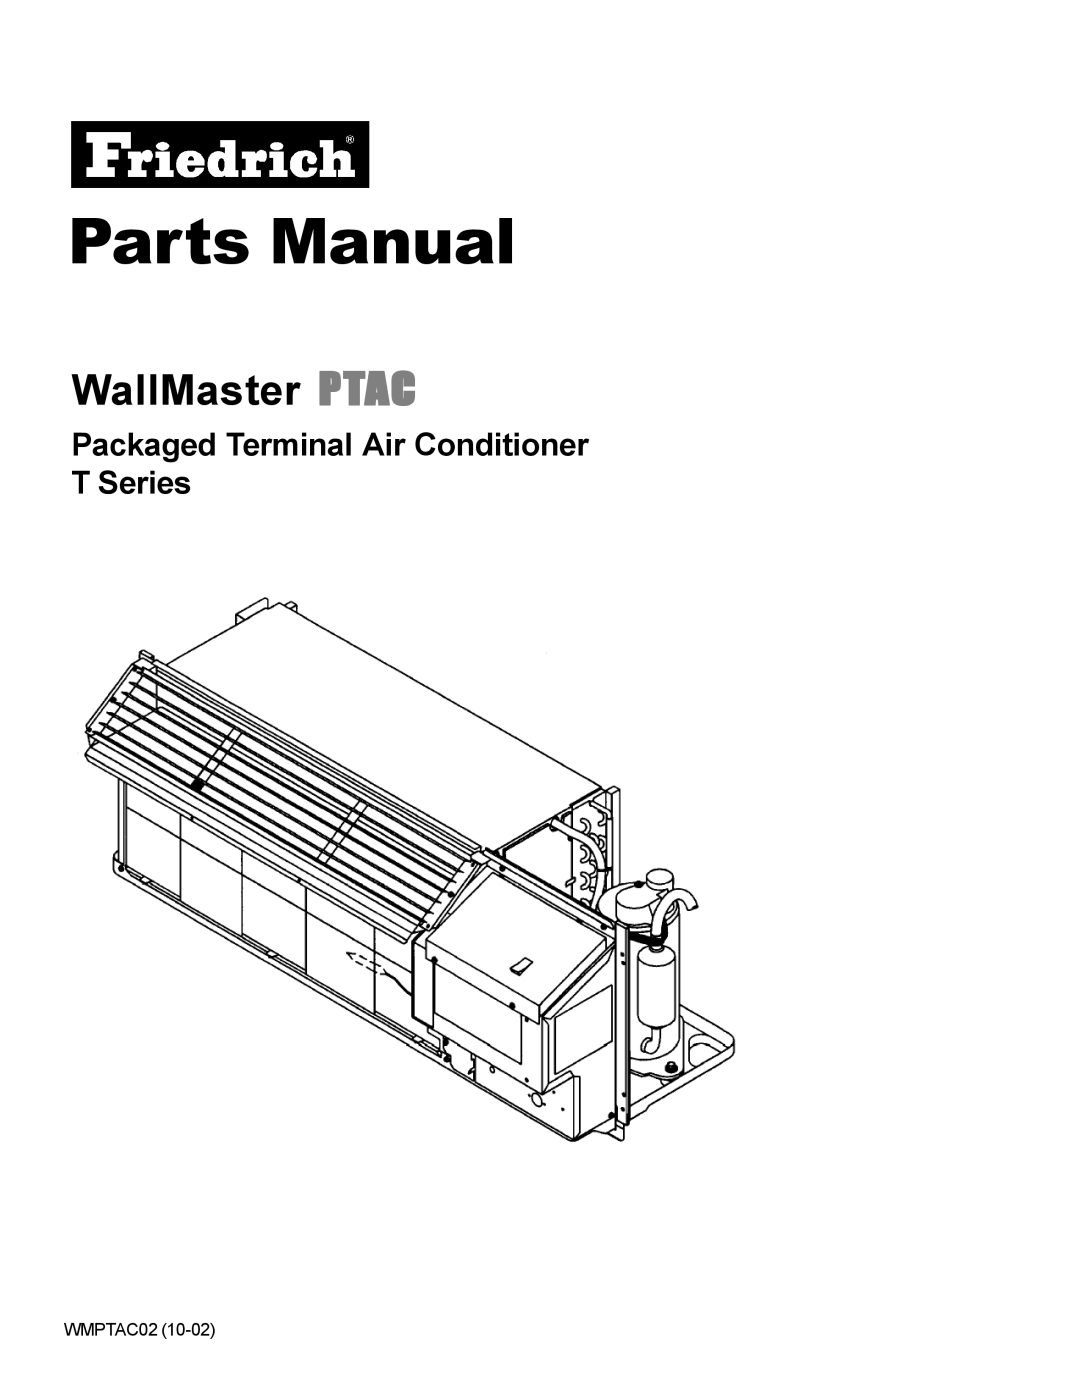 Friedrich WMPTAC02 manual WallMaster PTAC, Packaged Terminal Air Conditioner T Series, Parts Manual 